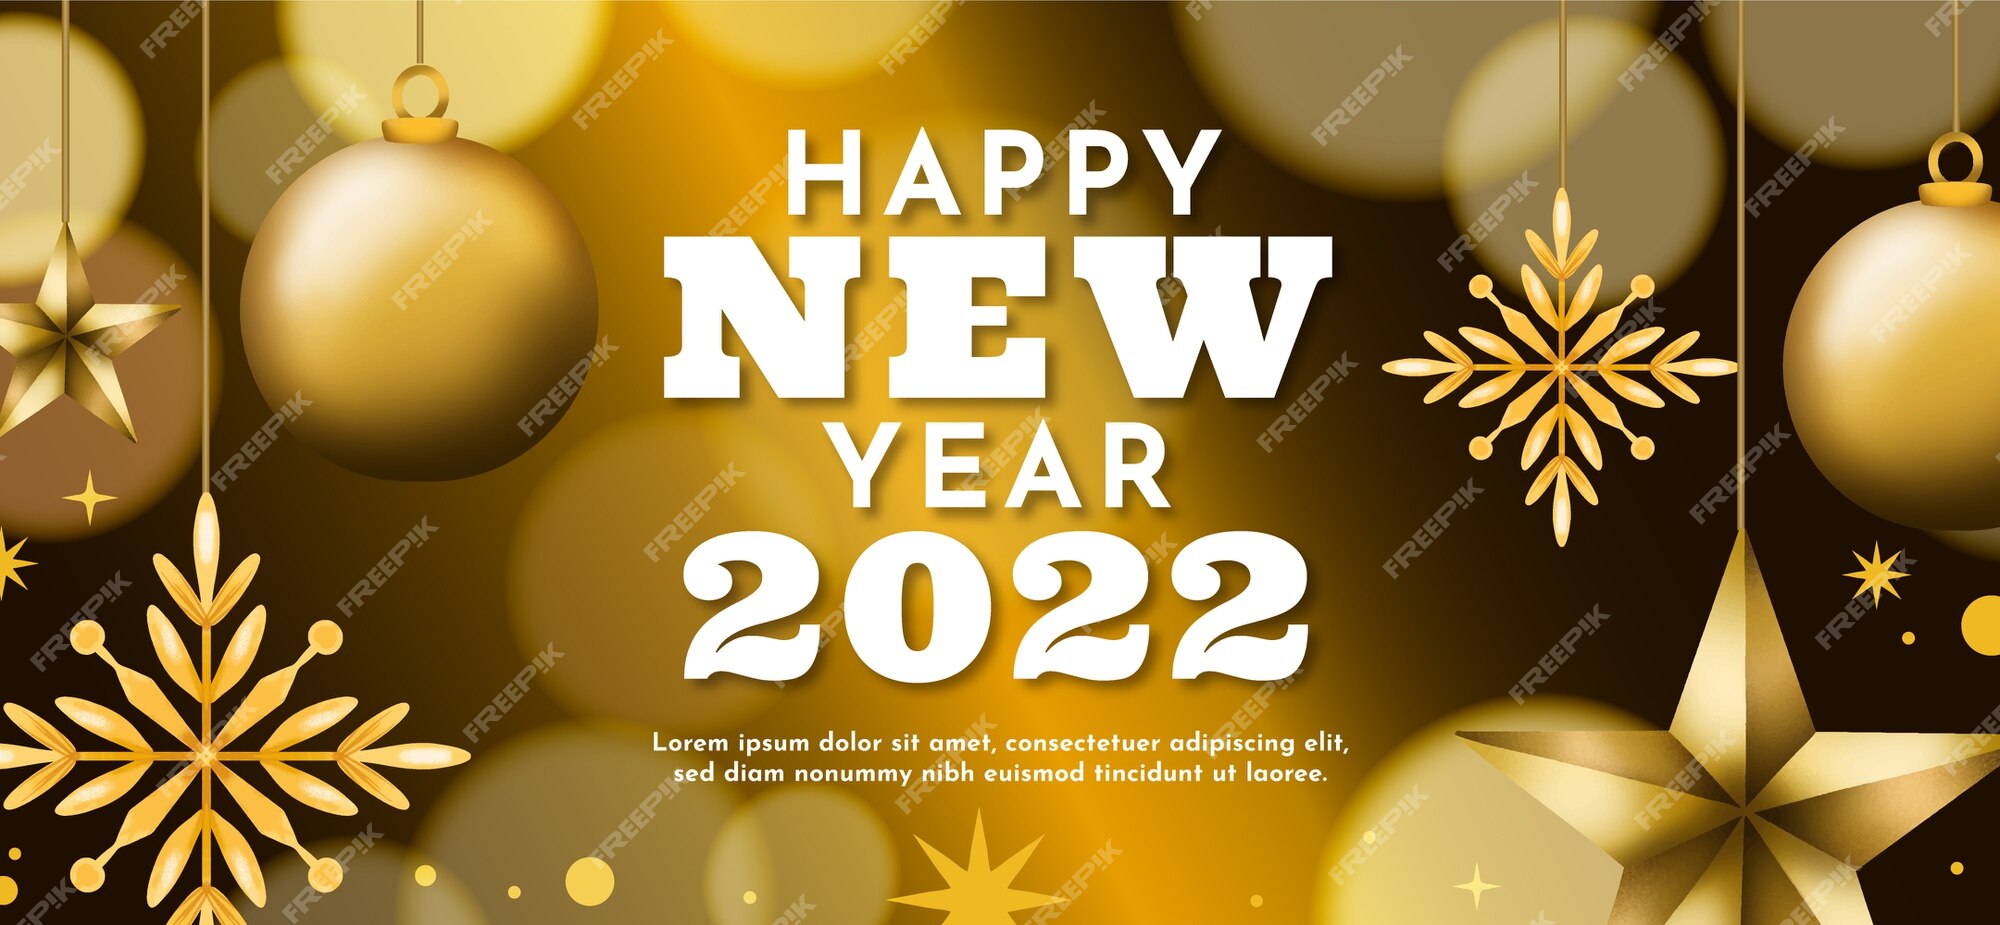 Page 29 | Happy New Year Greetings Images - Free Download on Freepik